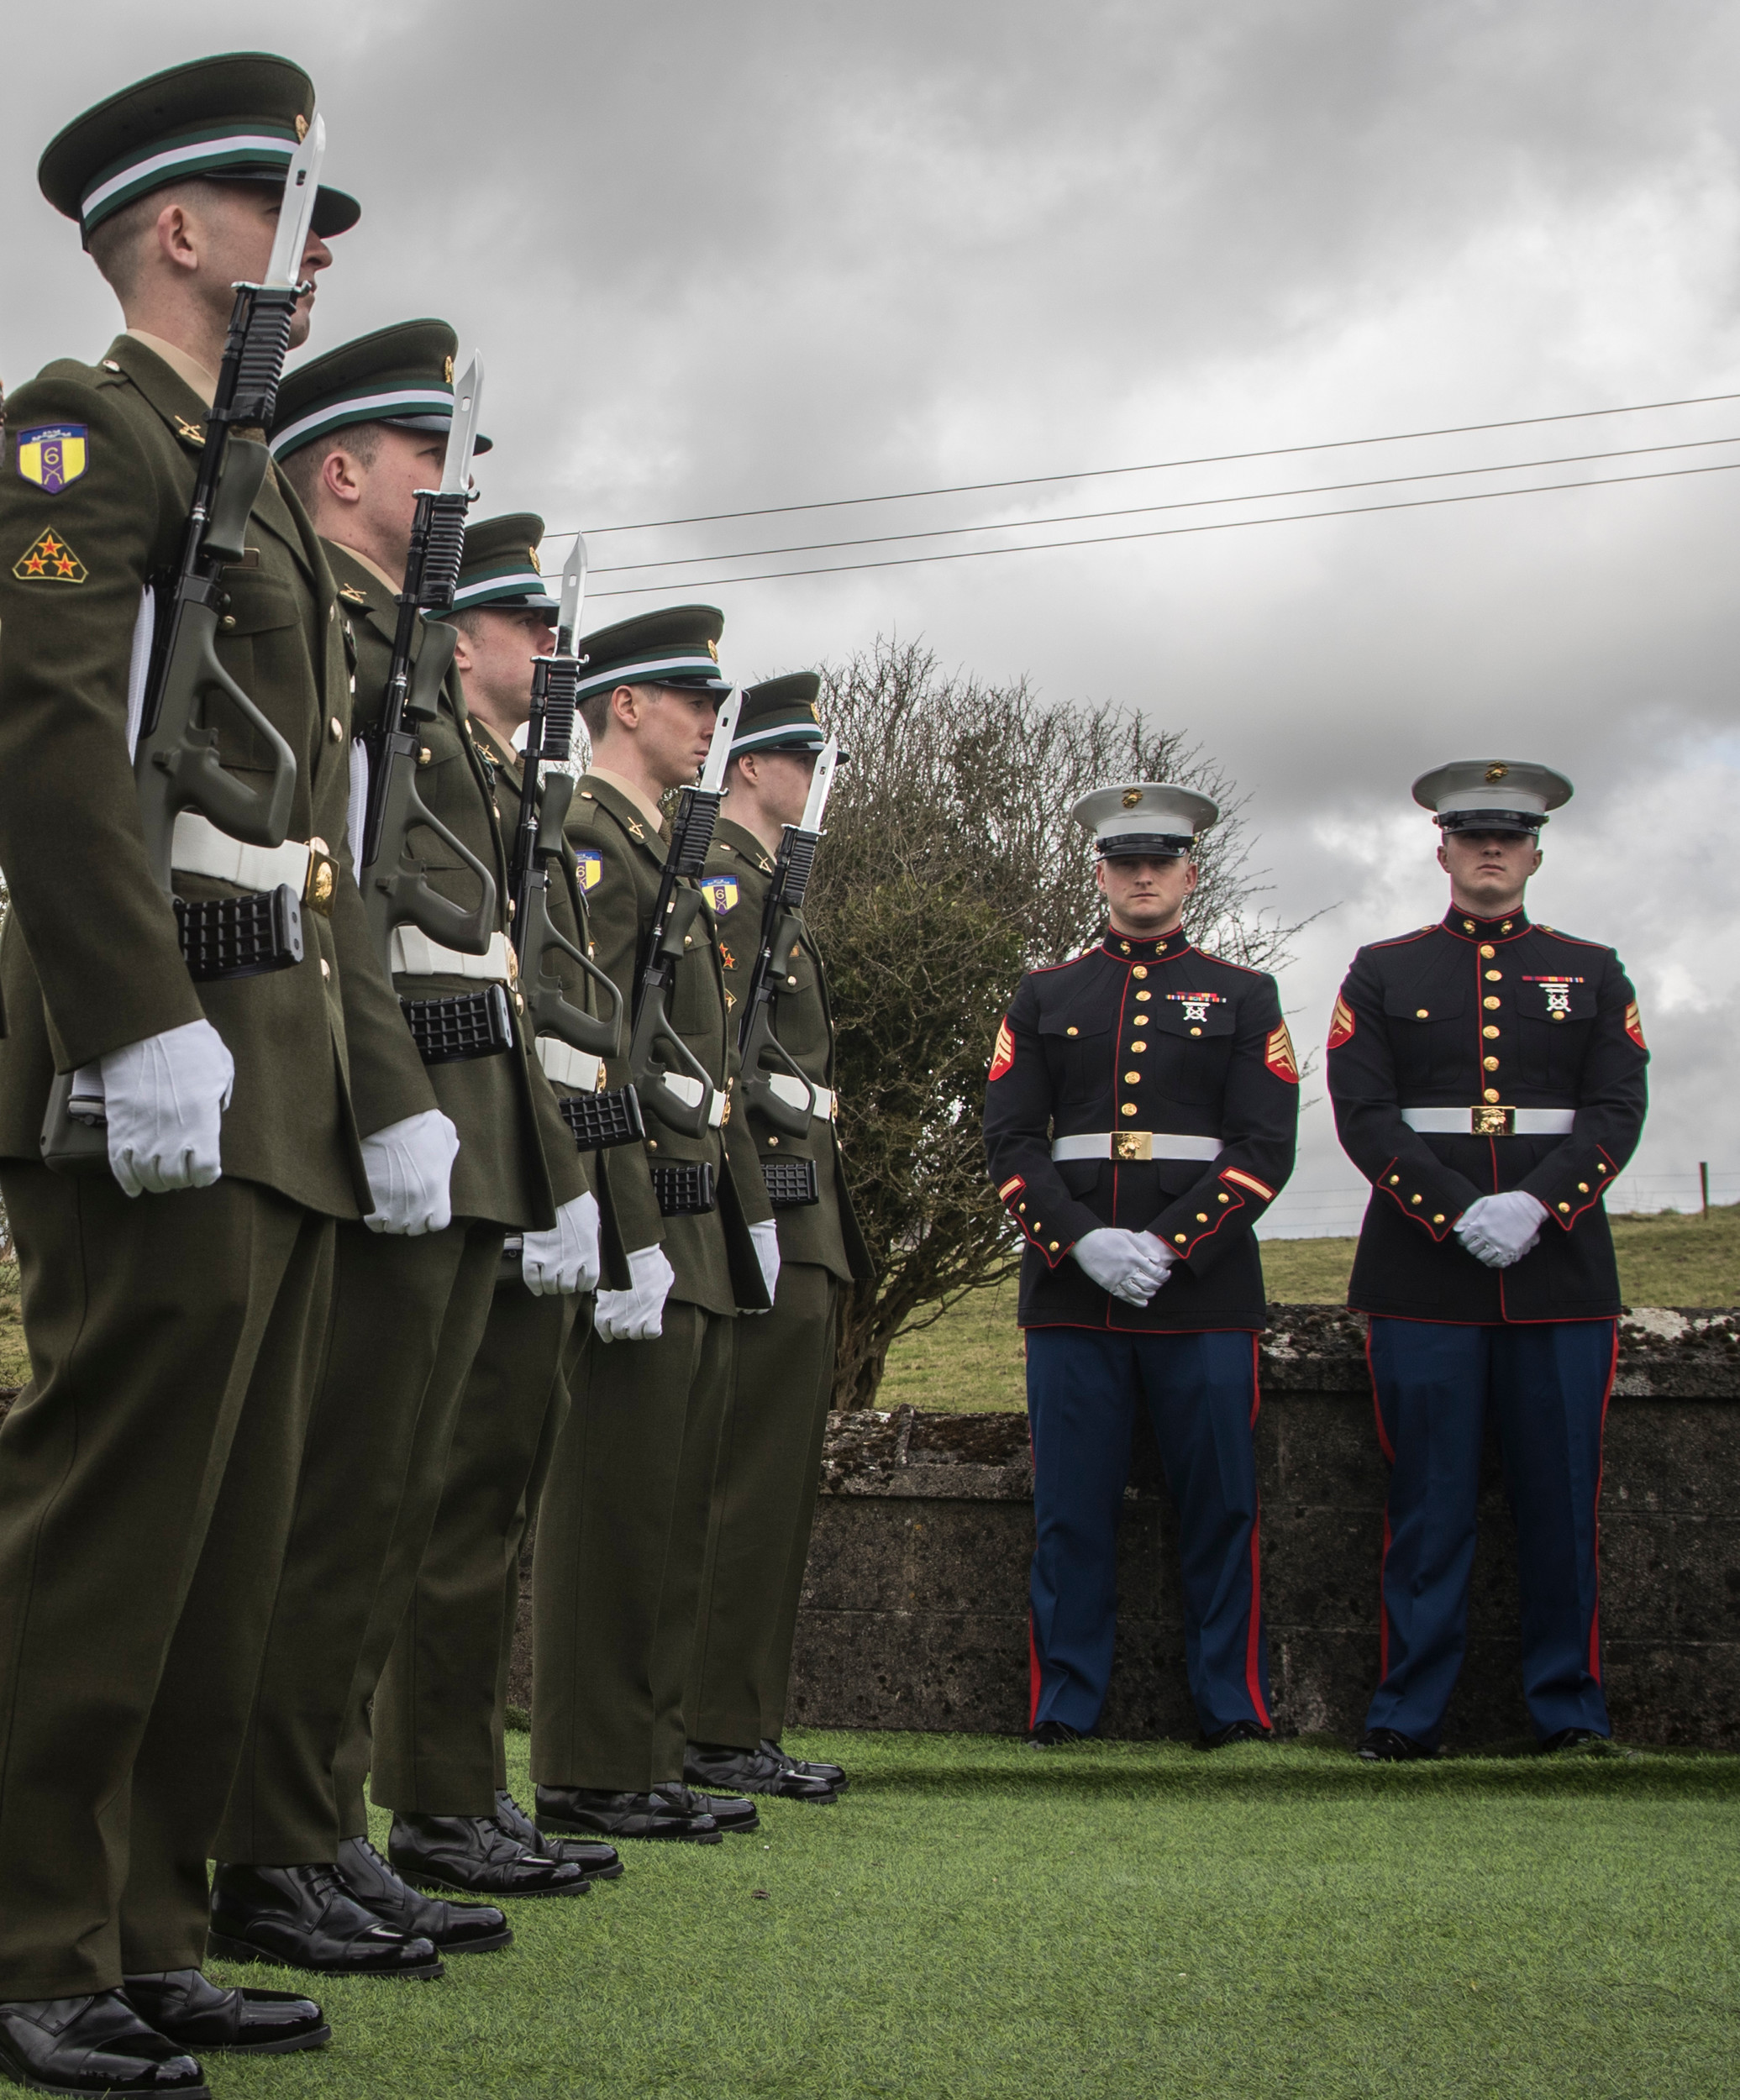 Members of the U.S. military and Irish Defense Forces stood at attention at Gallagher’s gravesite during the ceremony on March 30.